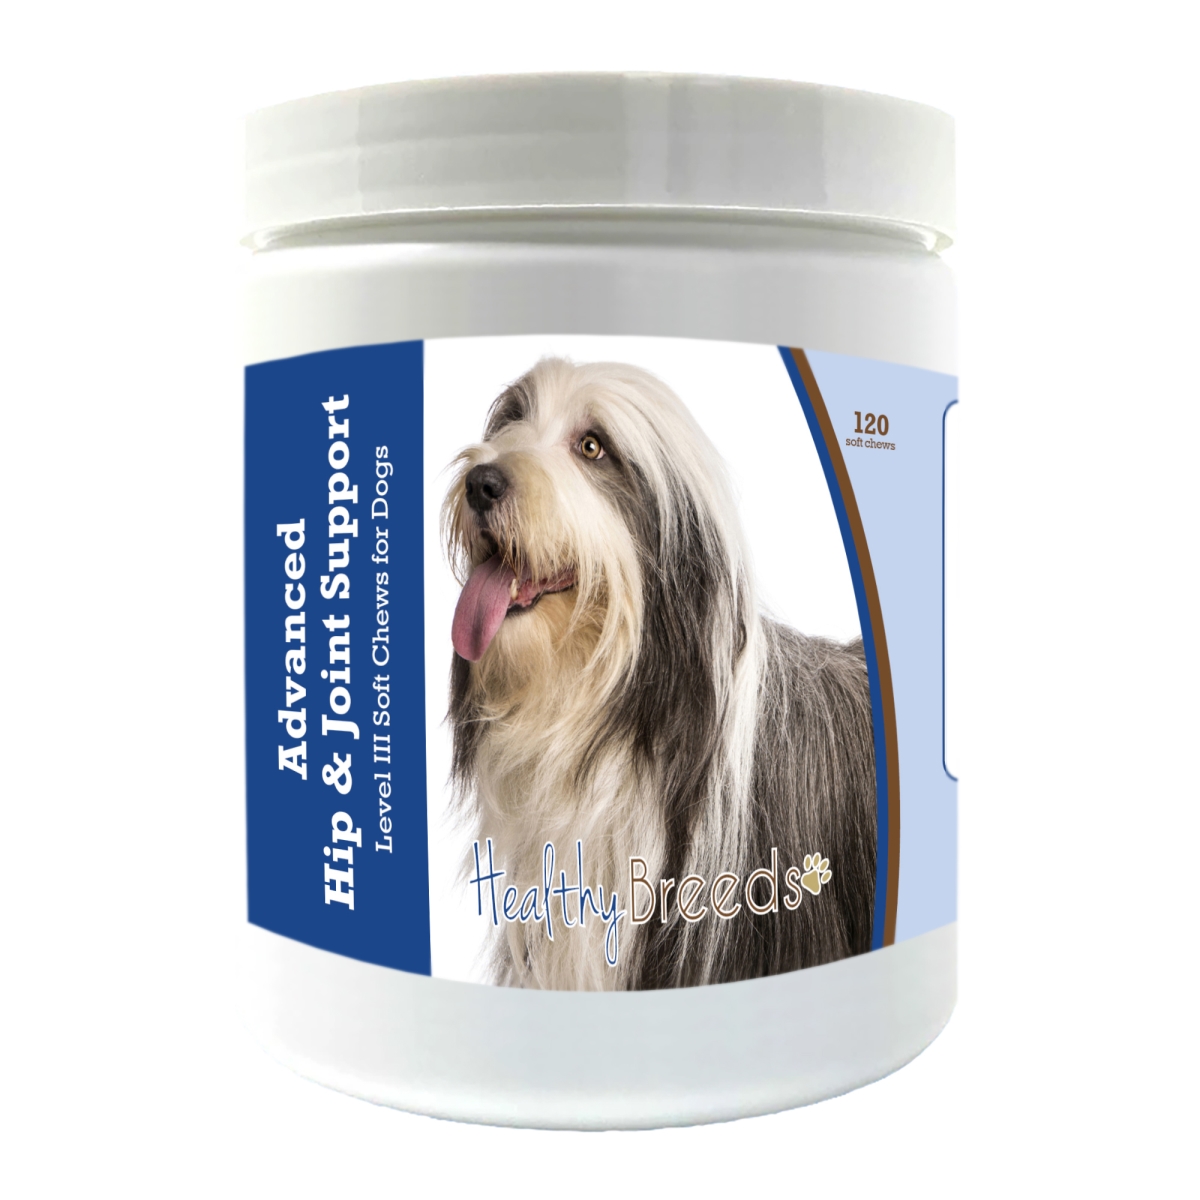 Picture of Healthy Breeds 192959897609 Bearded Collie Advanced Hip & Joint Support Level III Soft Chews for Dogs